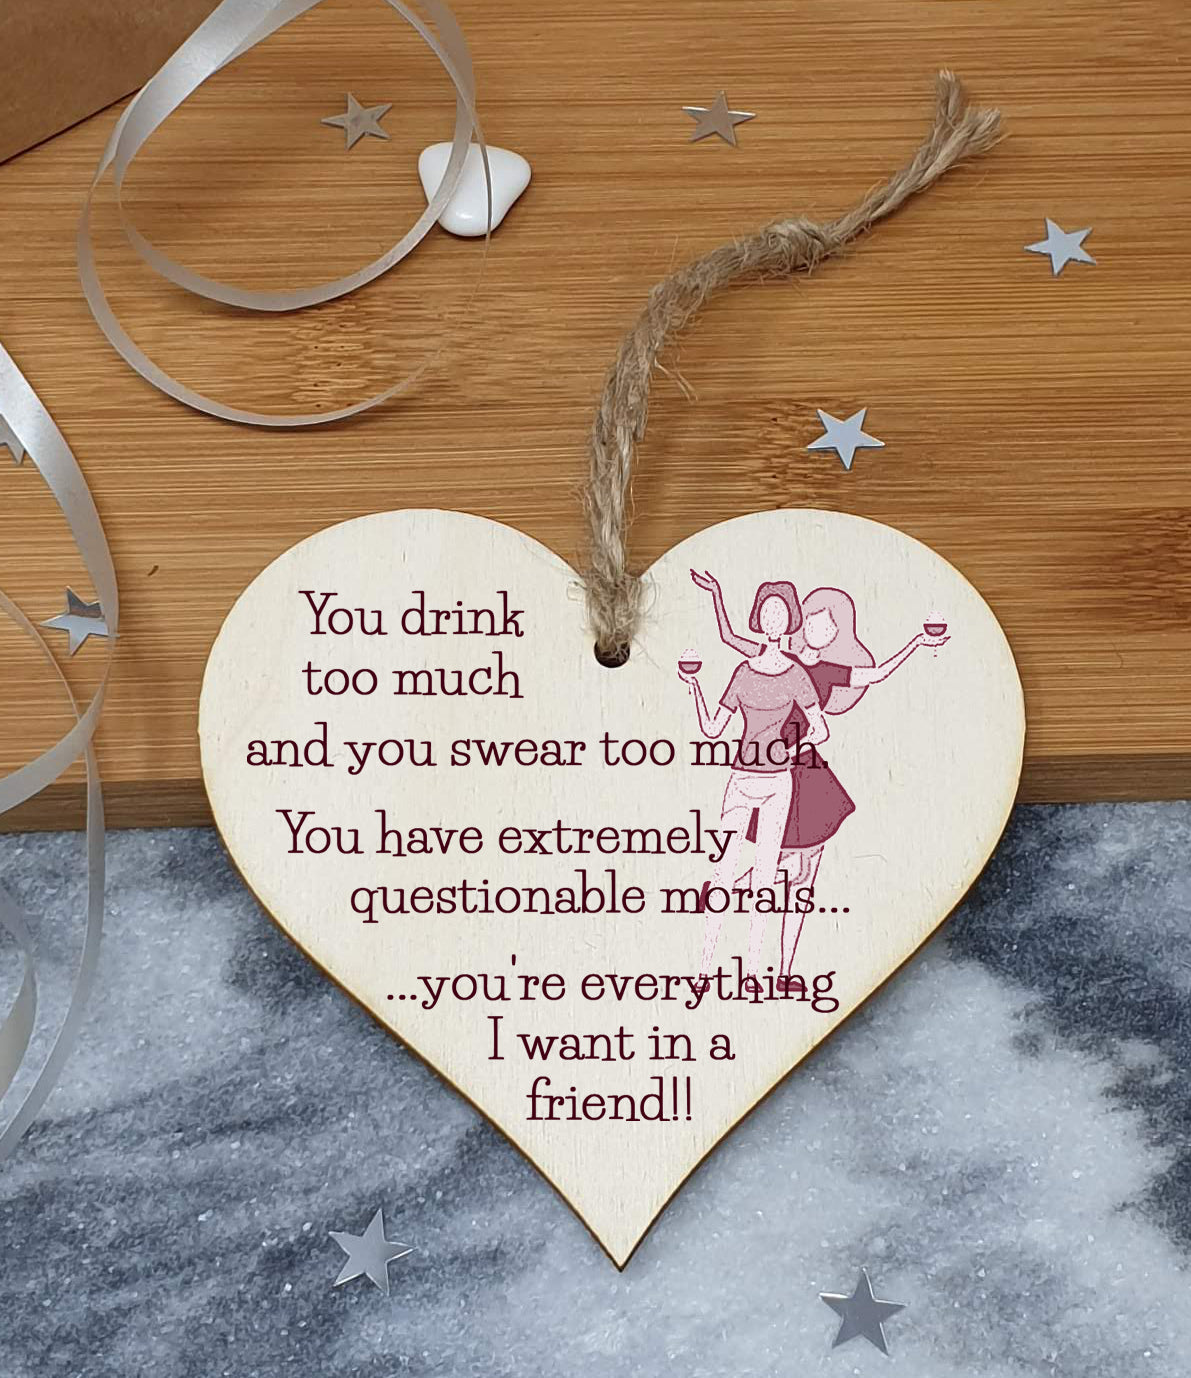 Handmade Wooden Hanging Heart Plaque Gift You're everything I want in a friend novelty alcohol funny window wall hanger absent friends friendship keepsake